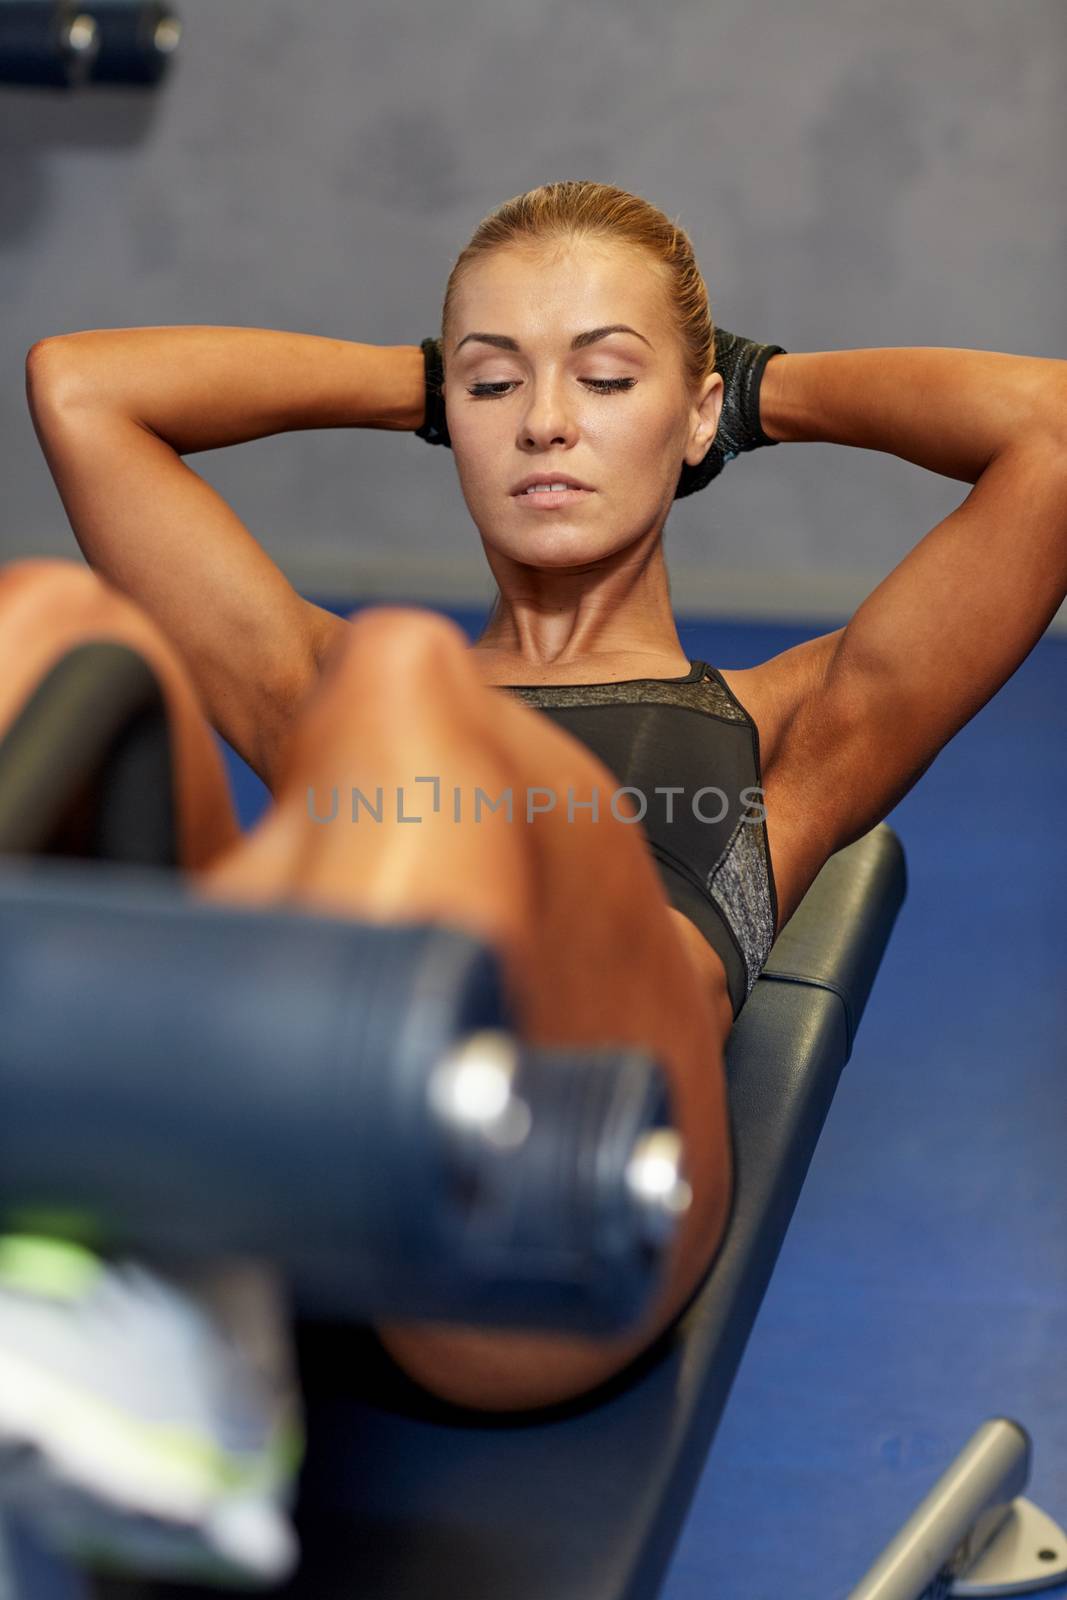 woman flexing abdominal muscles on bench in gym by dolgachov